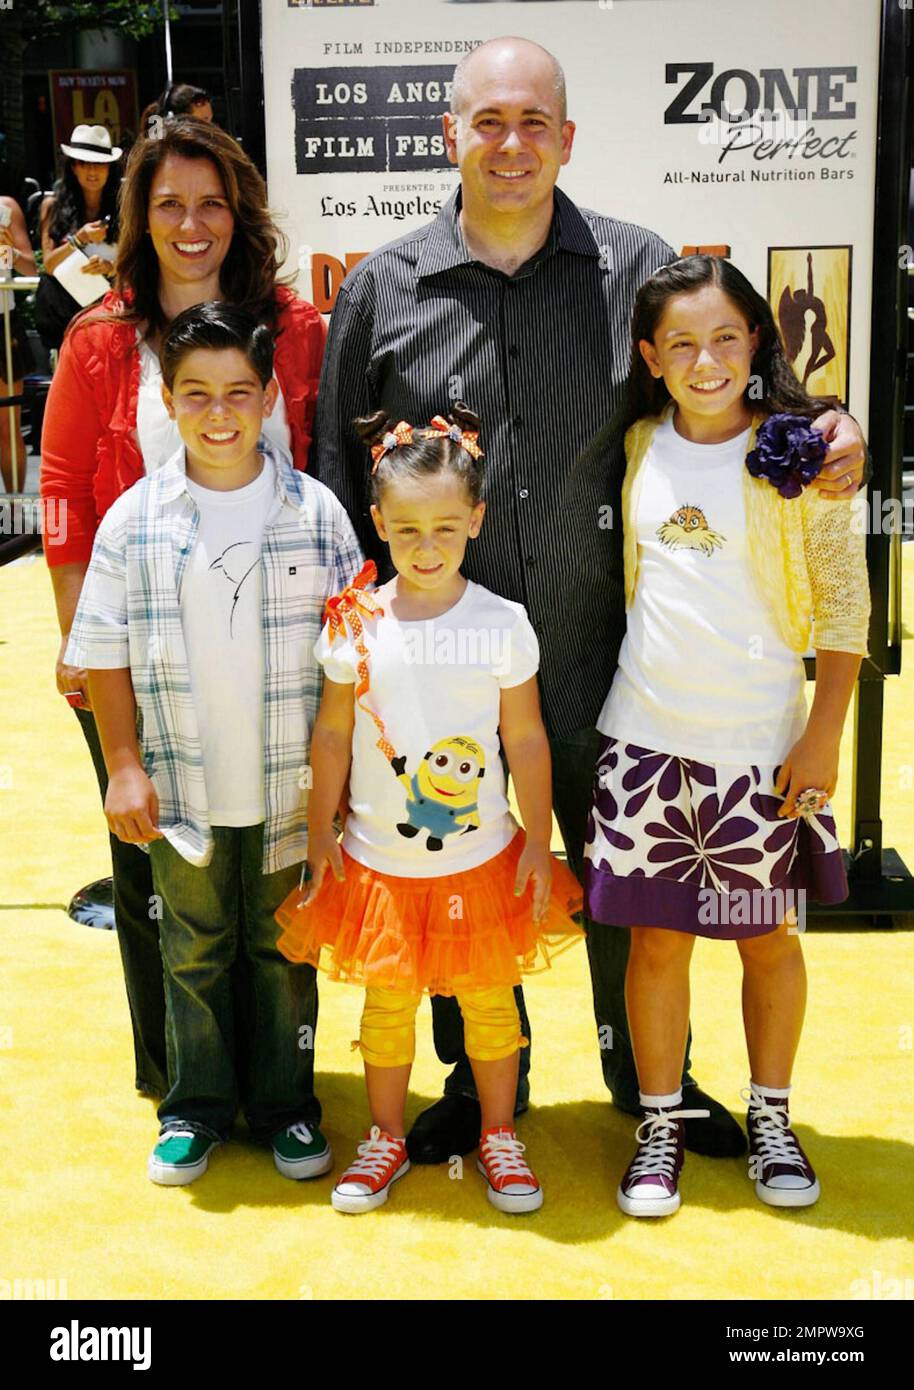 Writer Ken Daurio and family pose on the yellow carpet at the premiere of "Despicable Me" held at Nokia Theatre L.A. Live.  Universal Pictures' new 3-D CGI film, which features the voices of Russell Brand, Steve Carell and Julie Andrews, took place during the 2010 Los Angeles Film Festival. Los Angeles, CA. 06/27/10. . Stock Photo